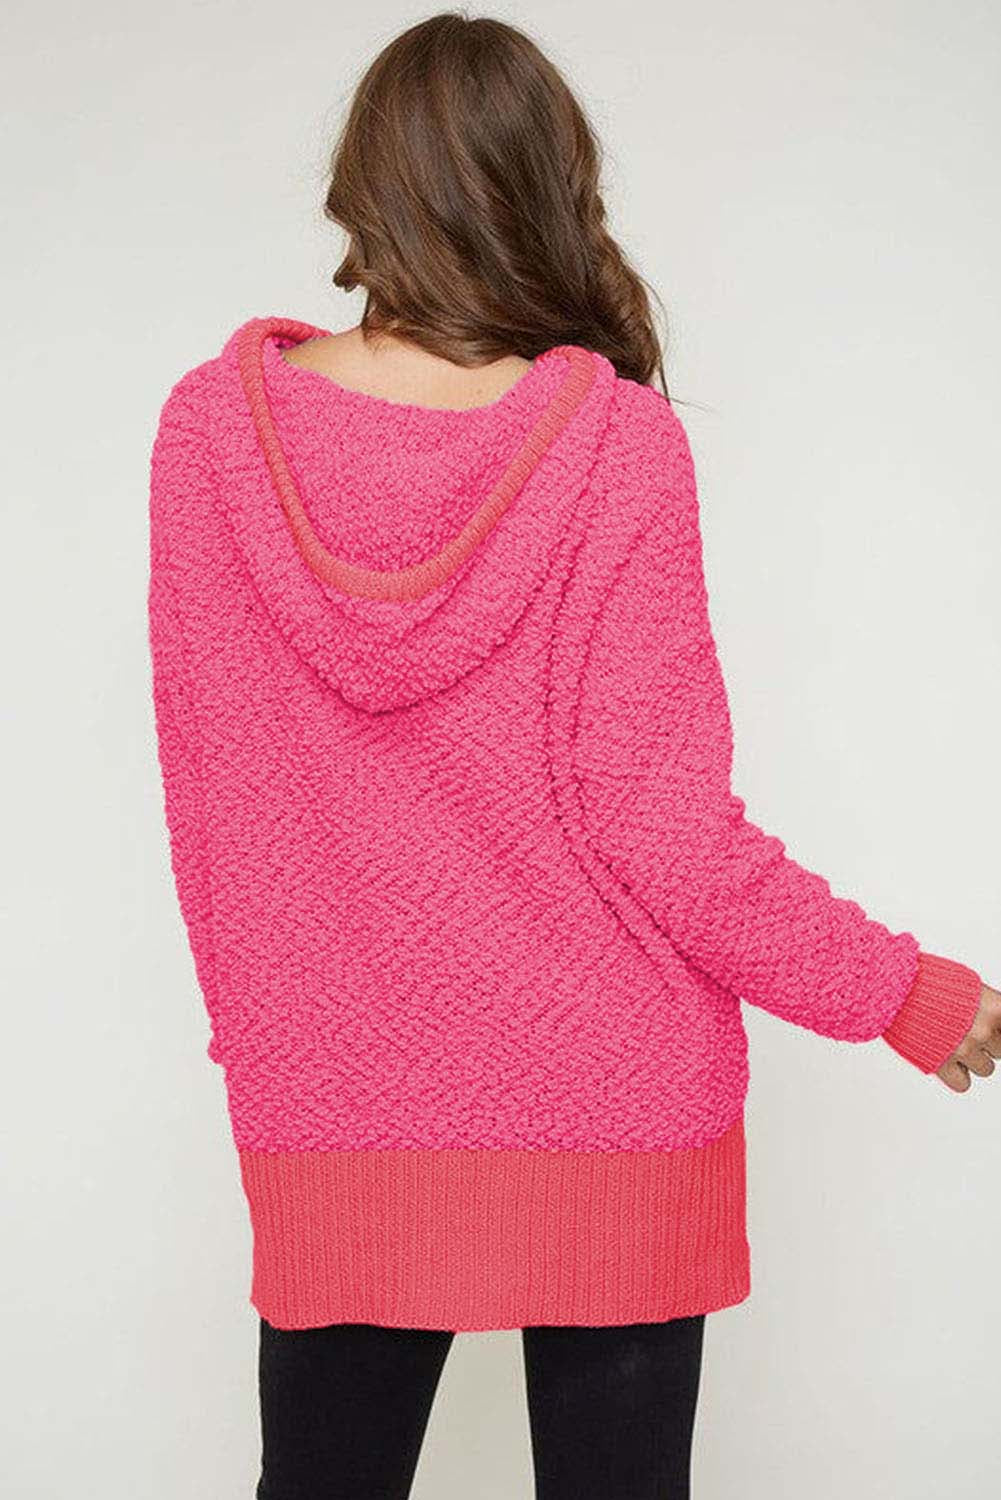 Loose Popcorn Textured Hooded Sweater